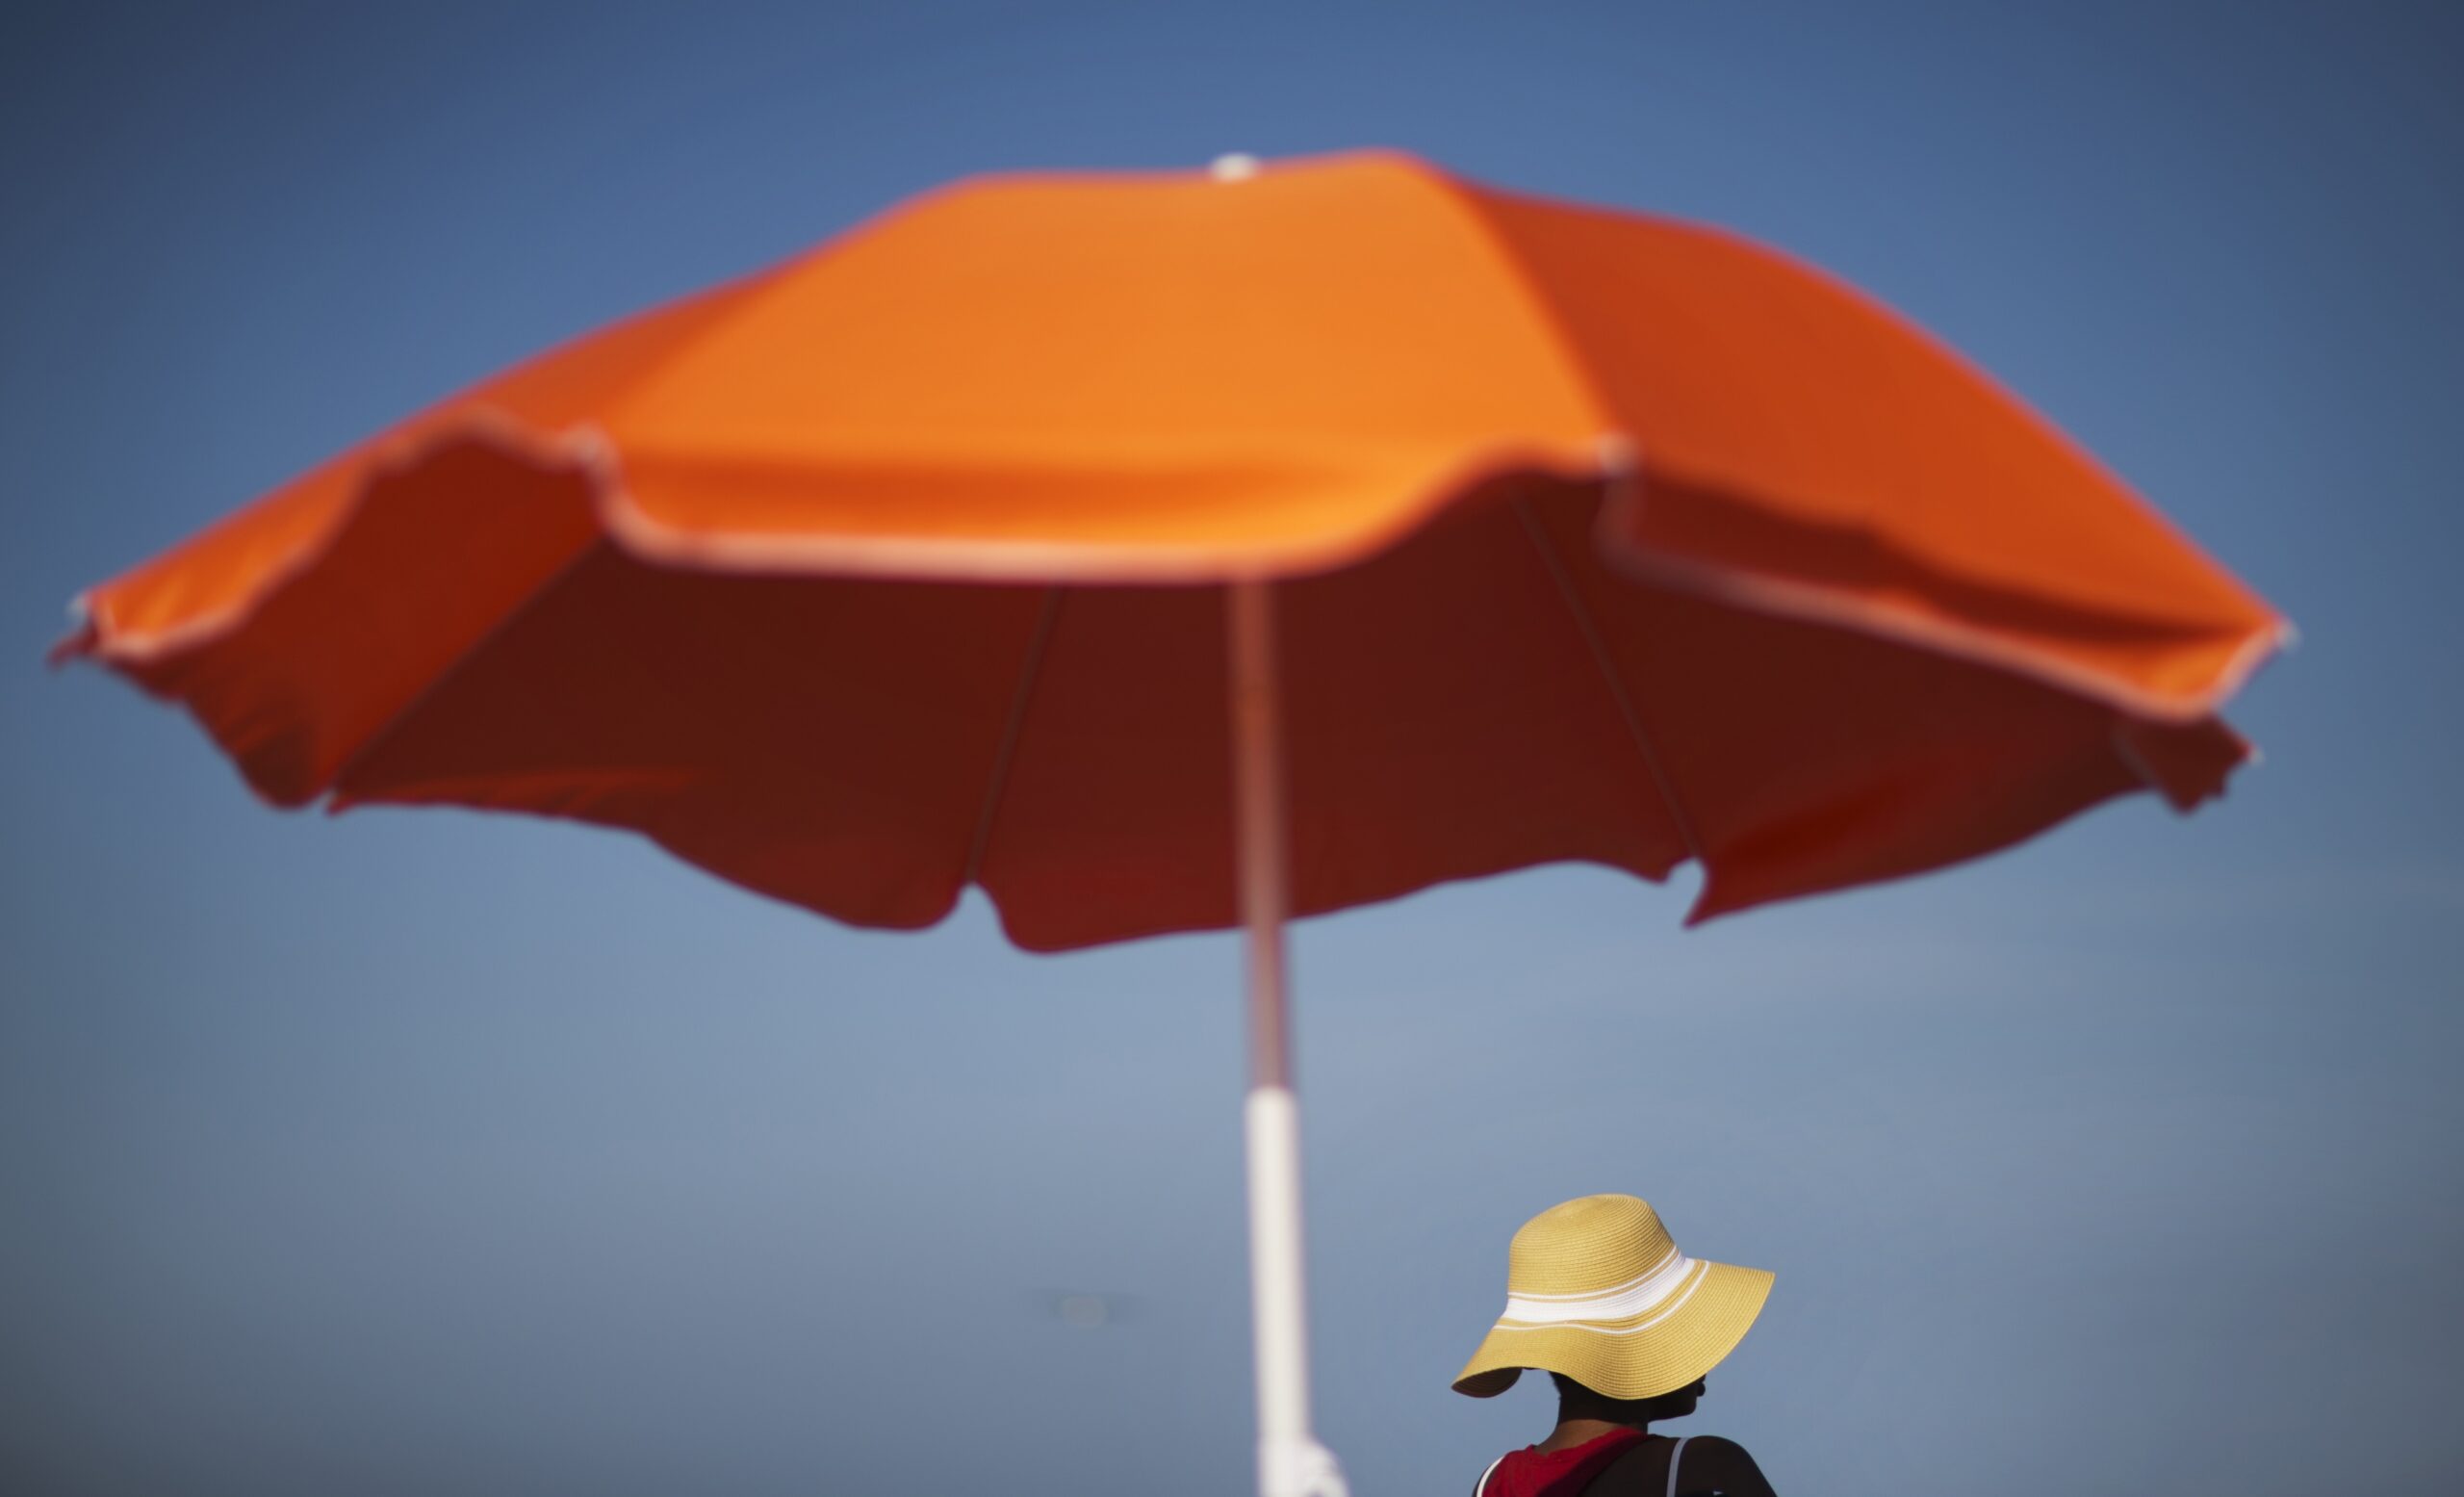 Wisconsin dermatologist dispels myths on sunscreen and skin health